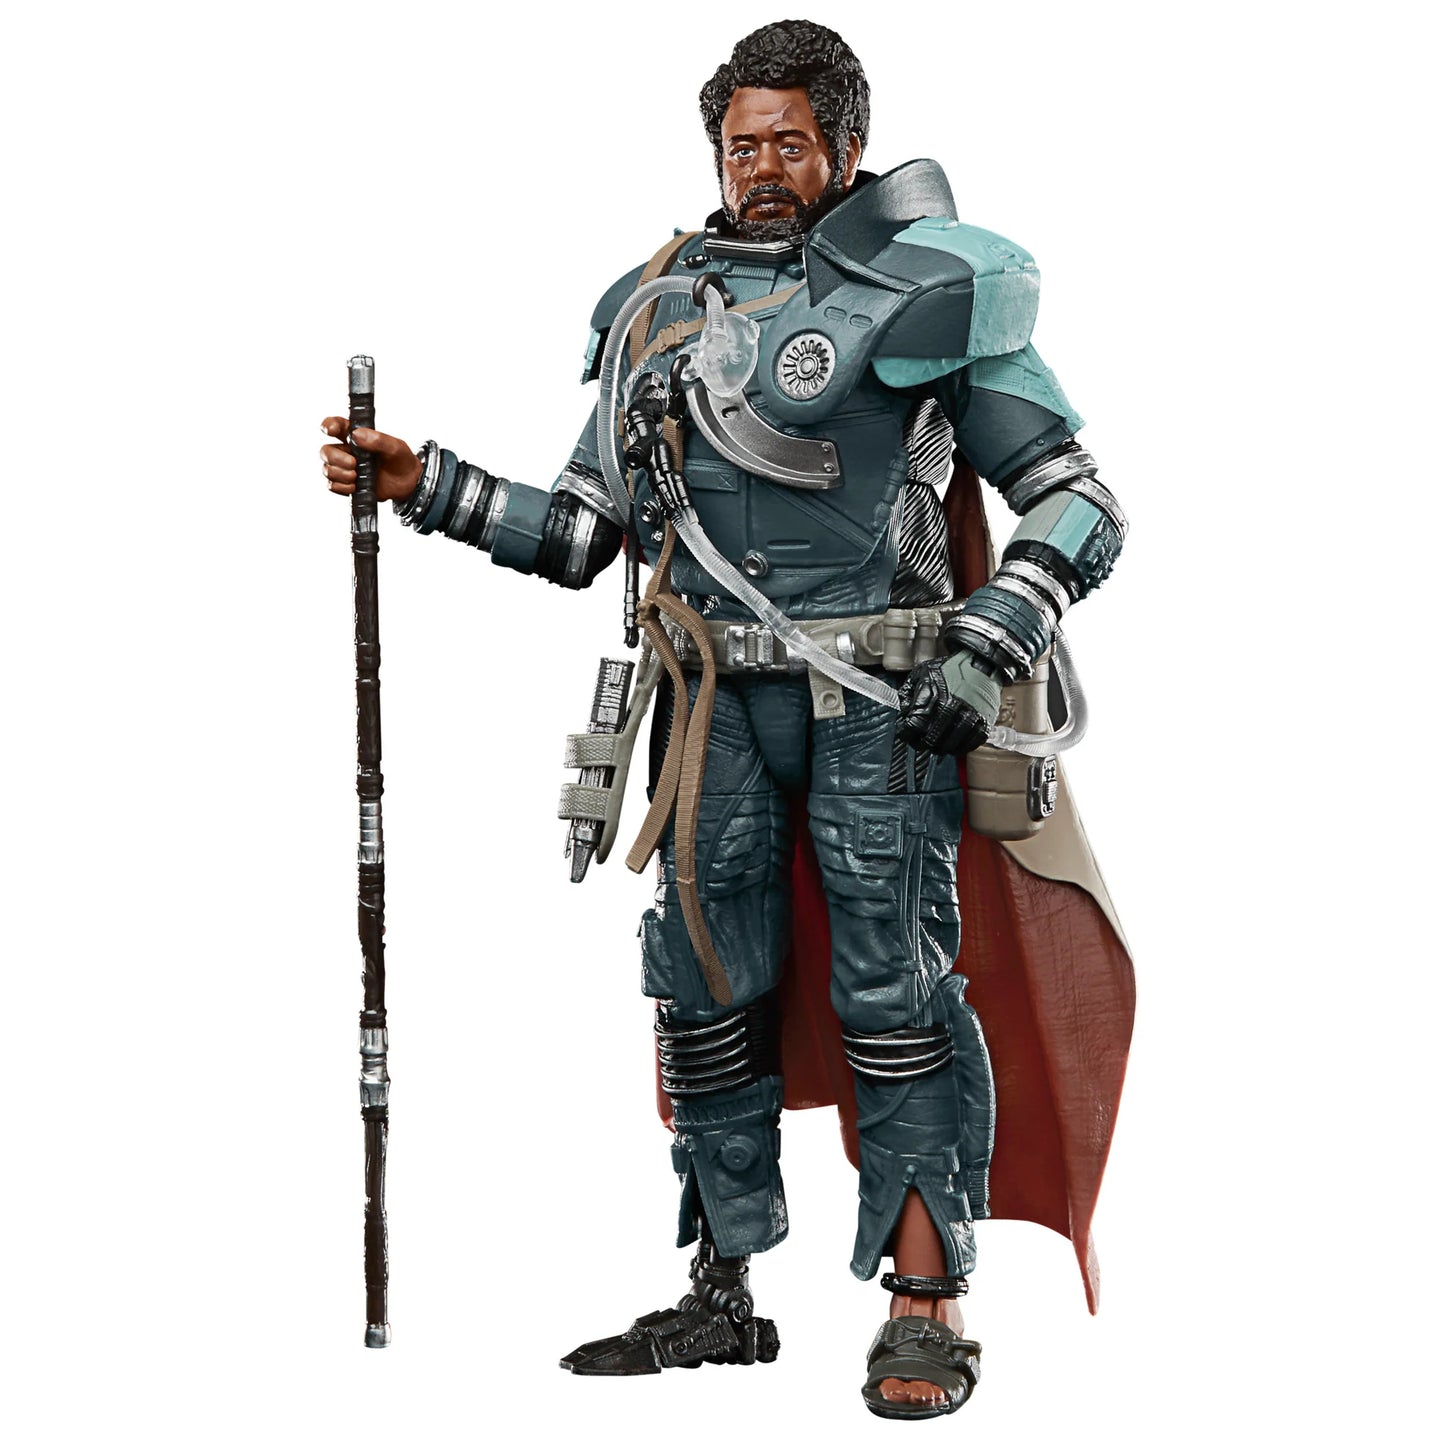 Star Wars The Black Series Saw Gerrera Deluxe (Rogue One: A Star Wars Story)